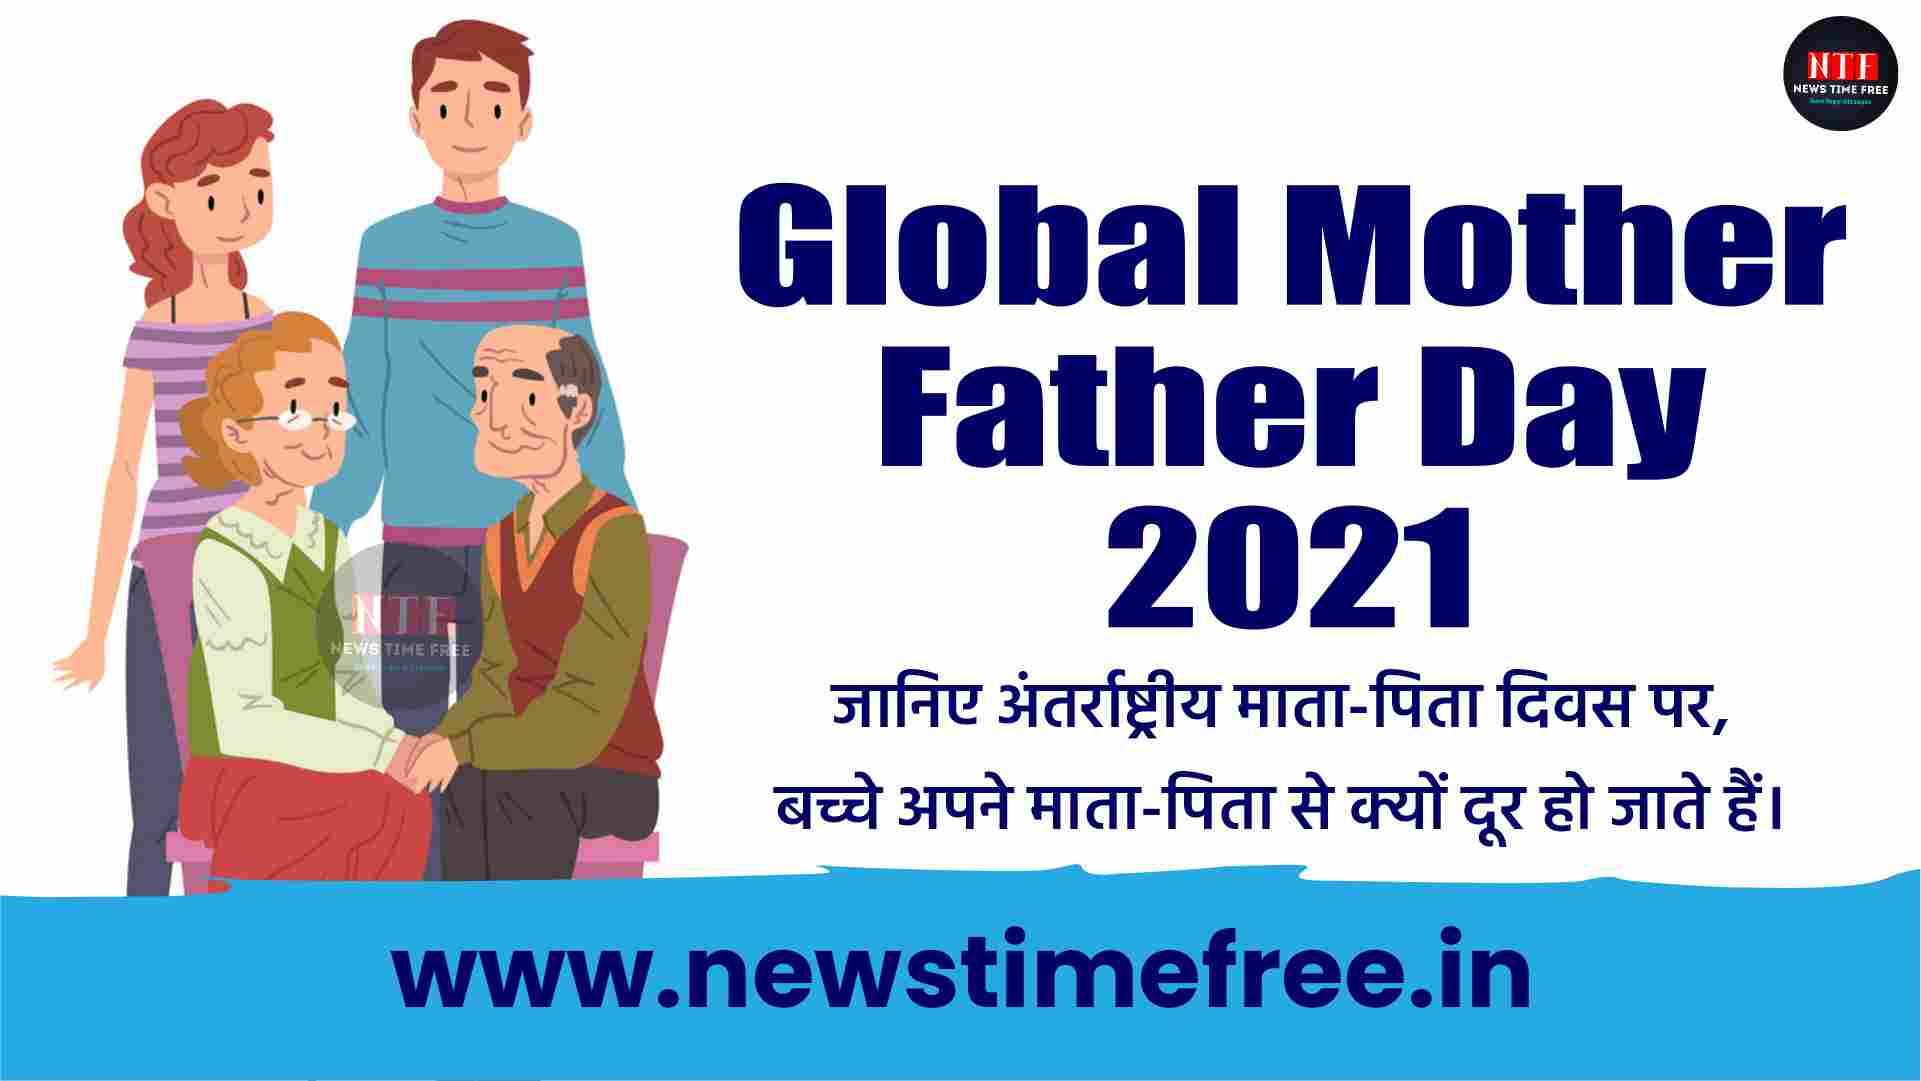 Global Mother Father Day 2021 2